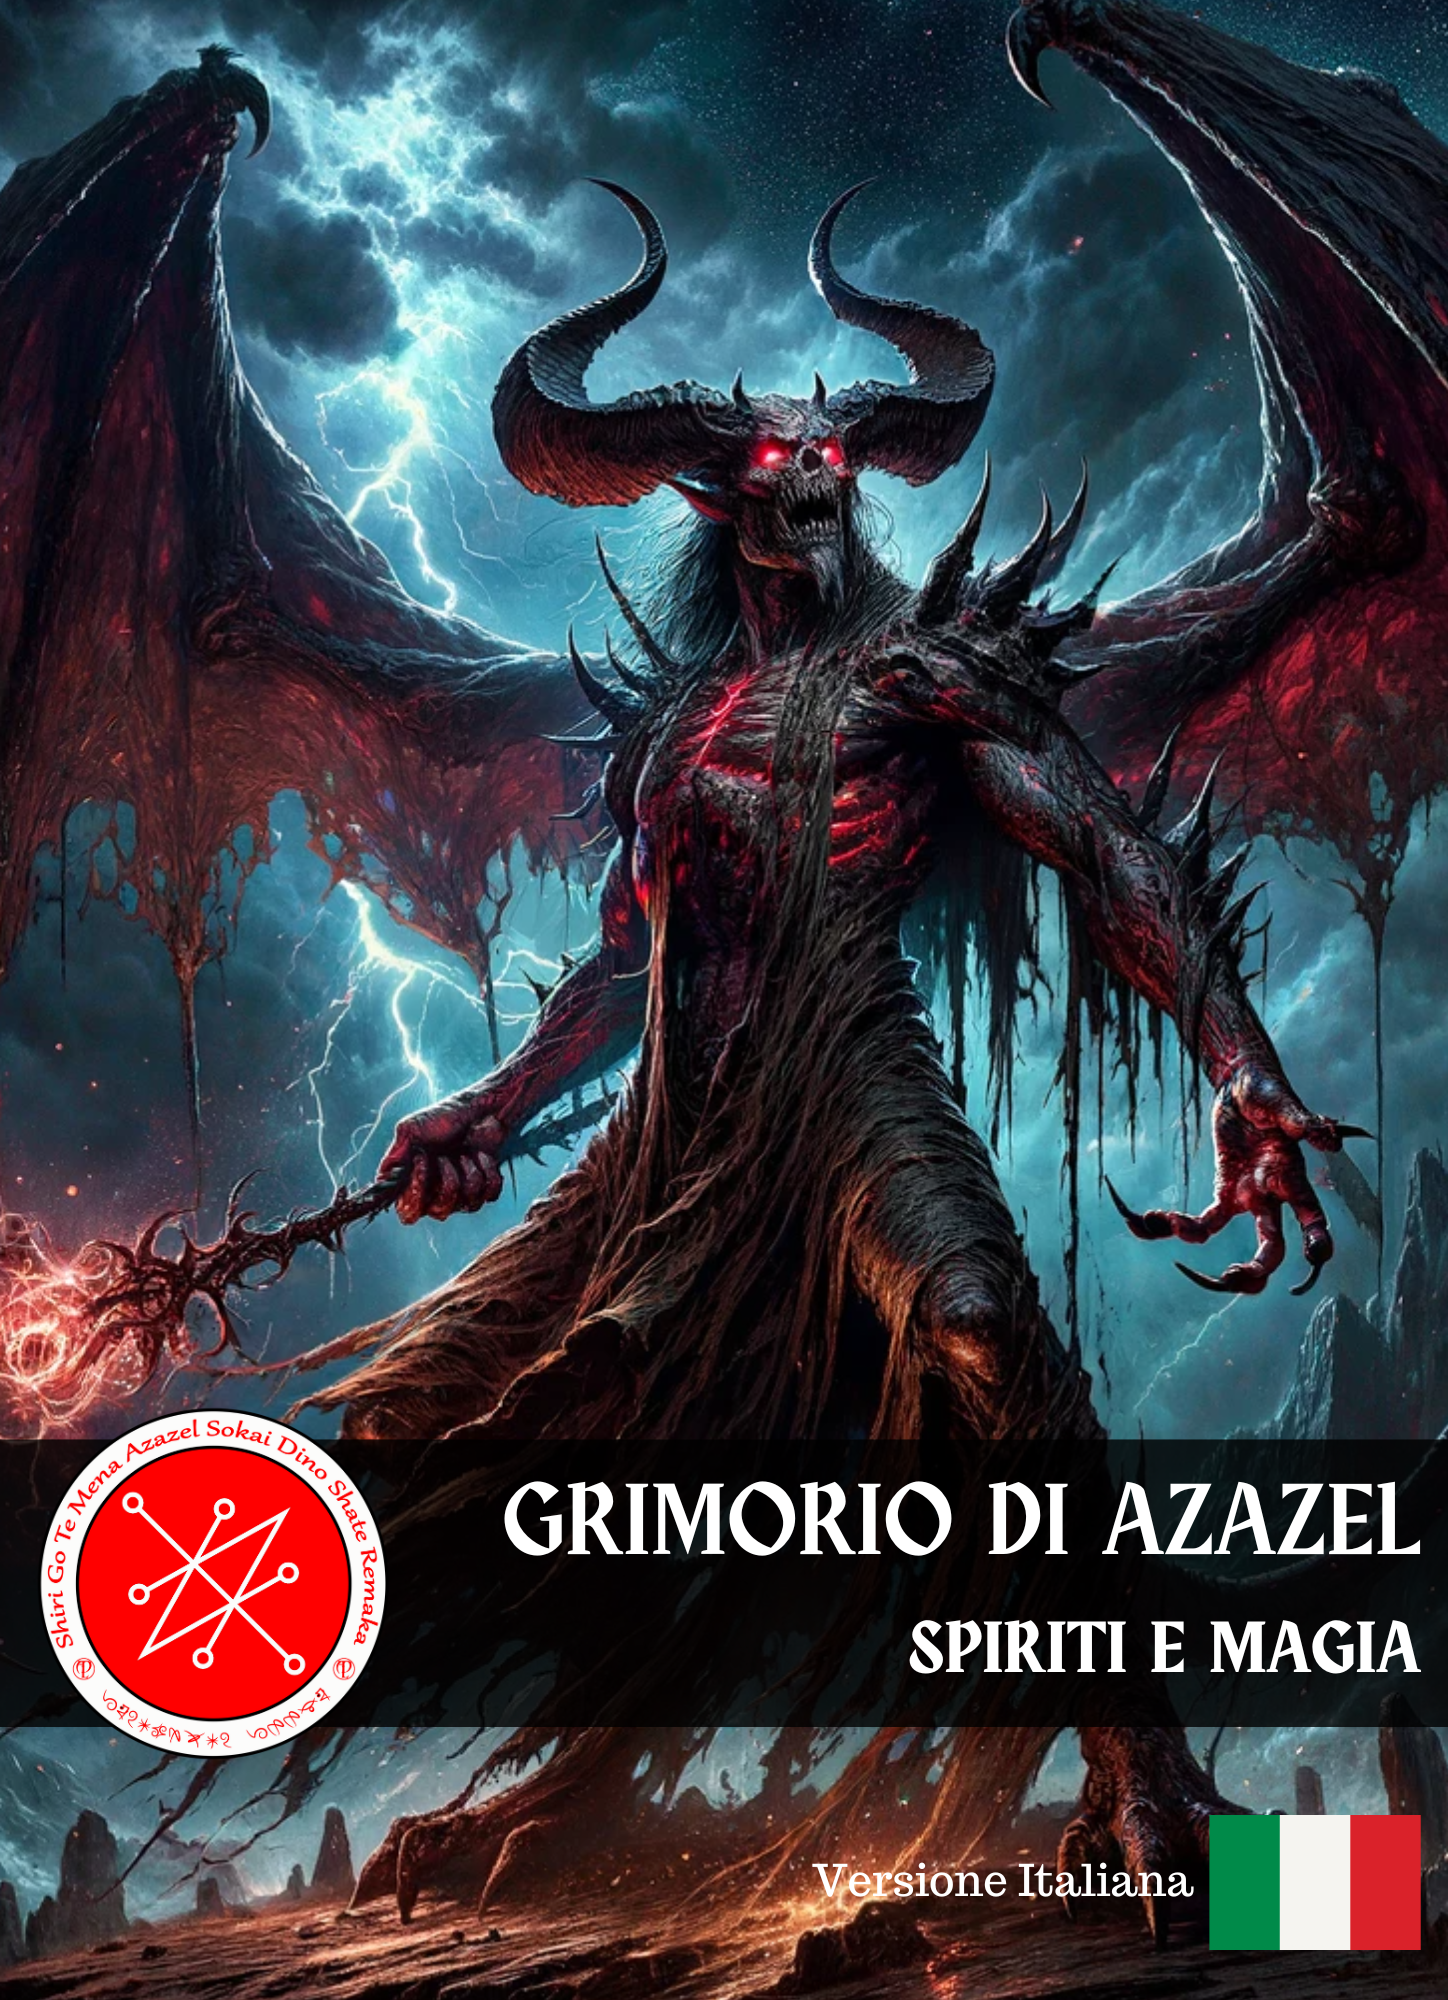 Grimoire of AZAZEL Spells & Rituals to remove toxic energies, blockages and to Empower Yourself - Abraxas Amulets ® Magic ♾️ Talismans ♾️ Initiations